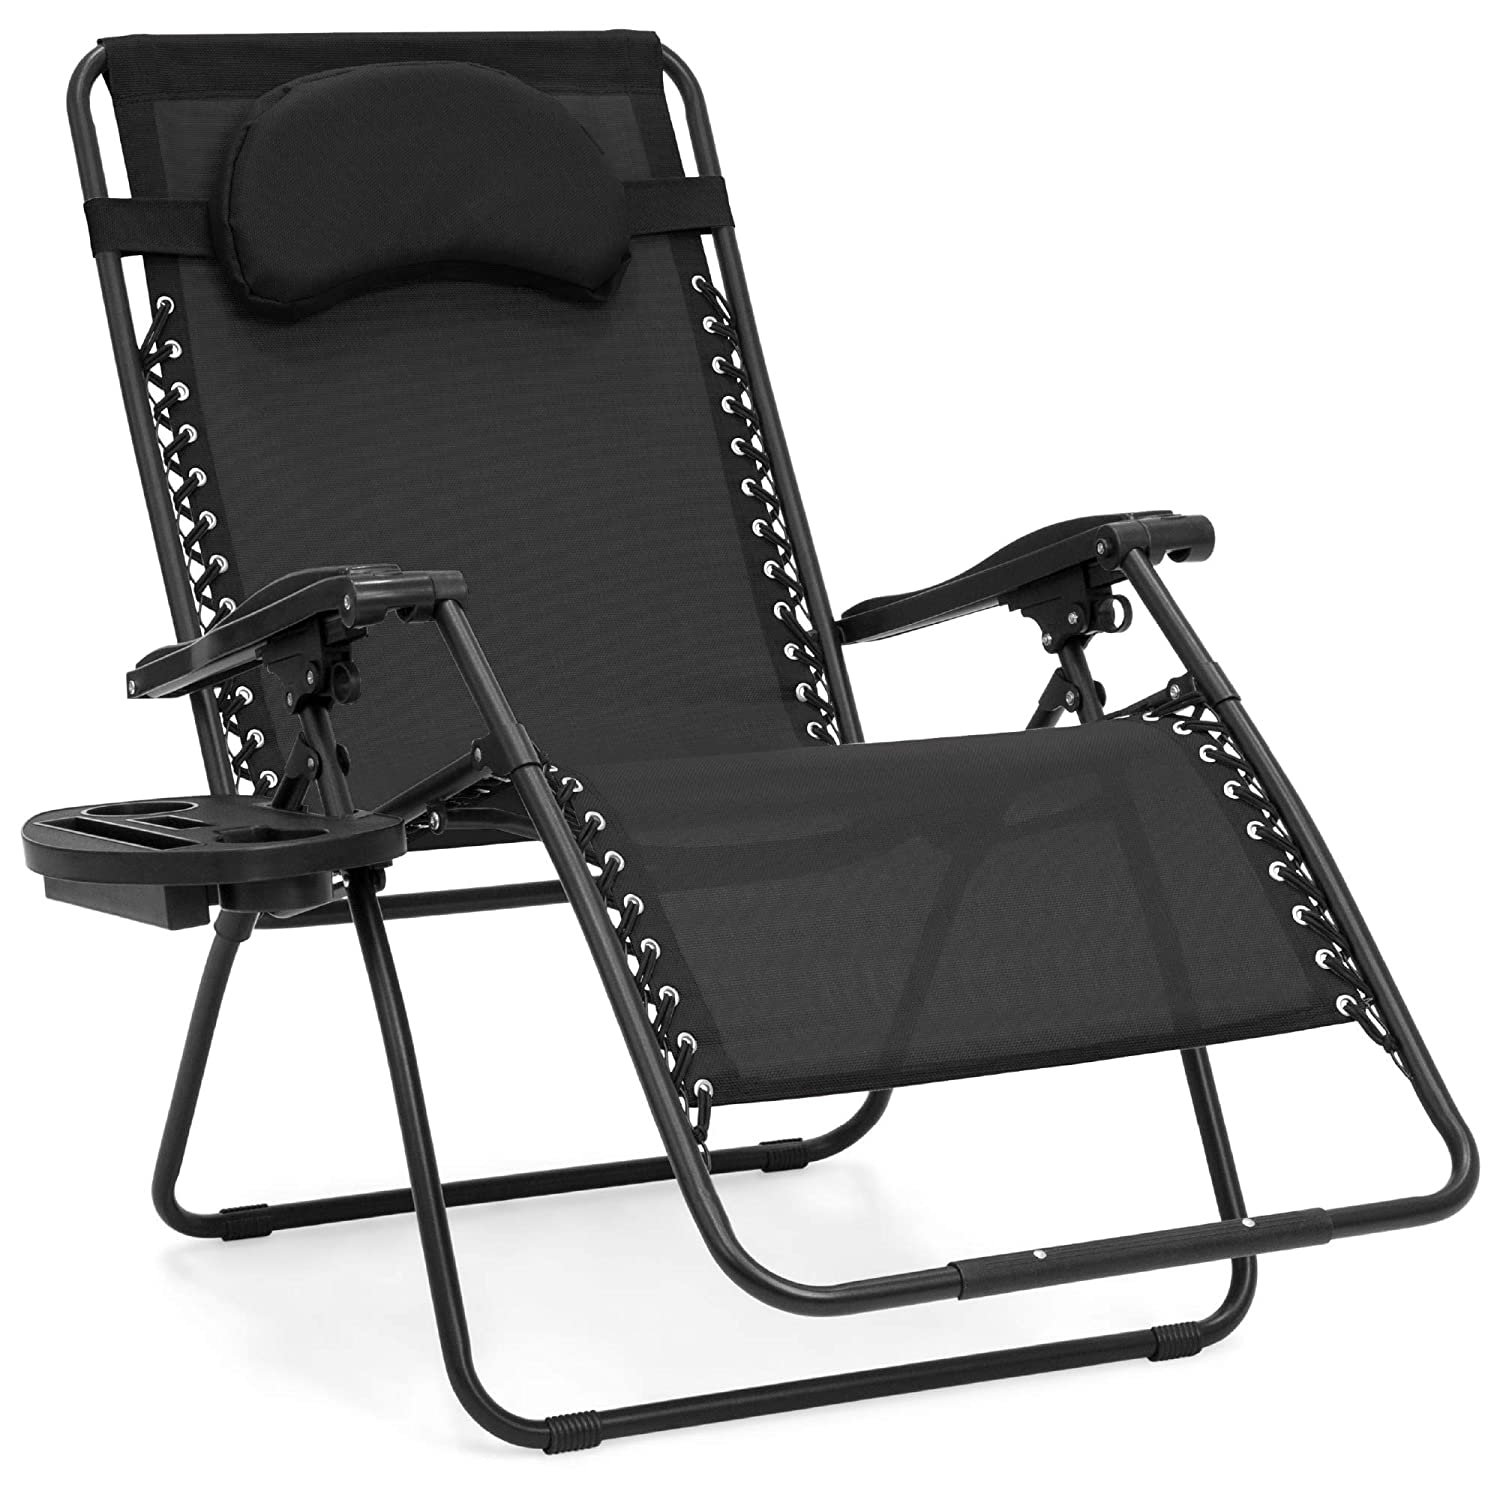 canopy chair - Best Choice Products Oversized Zero Gravity Reclining Lounge Patio Chair